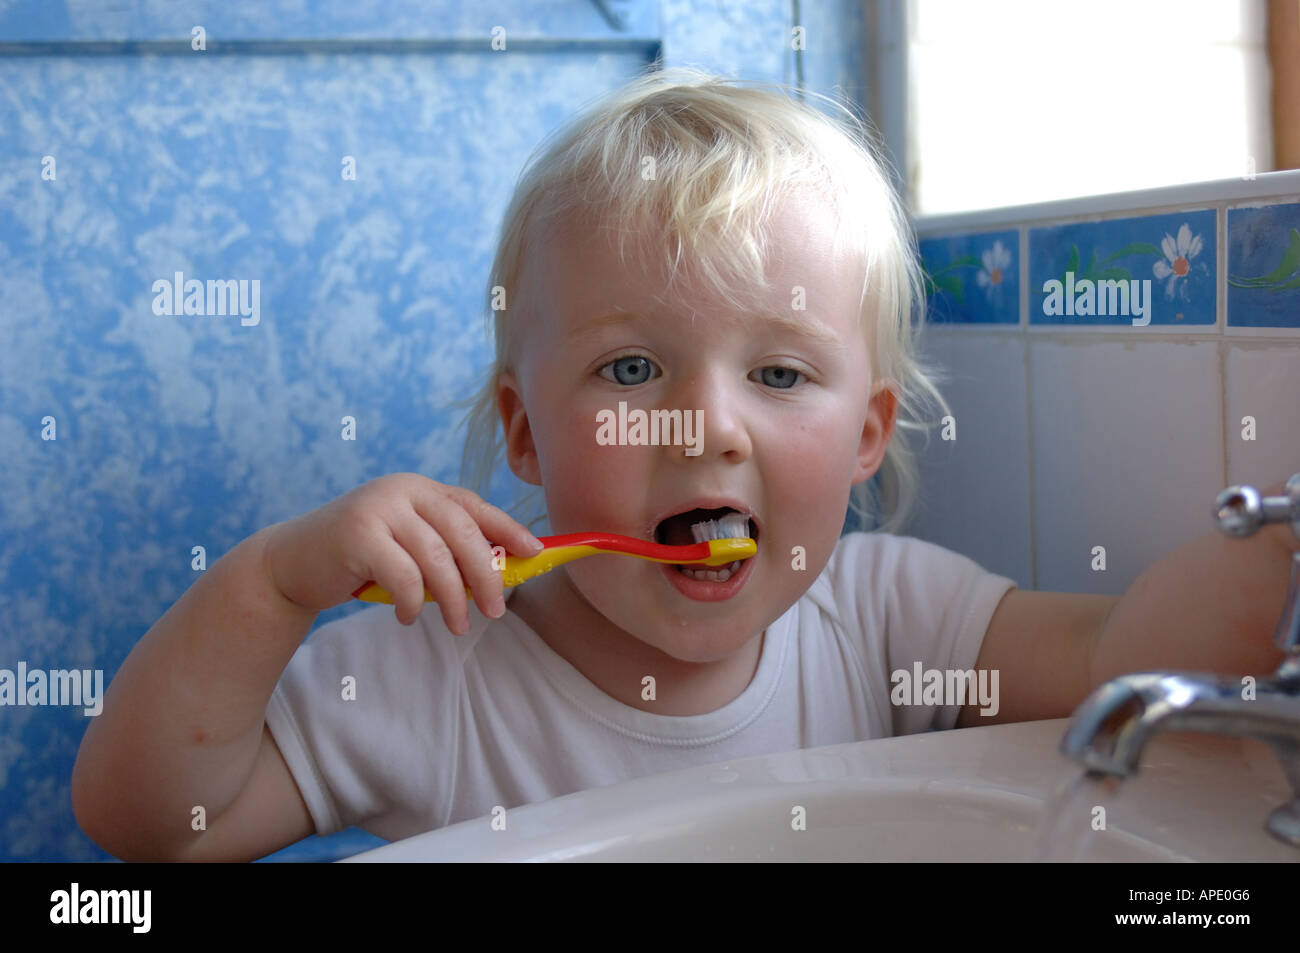 A young blonde female toddler brushing her teeth with the sink tap running Stock Photo